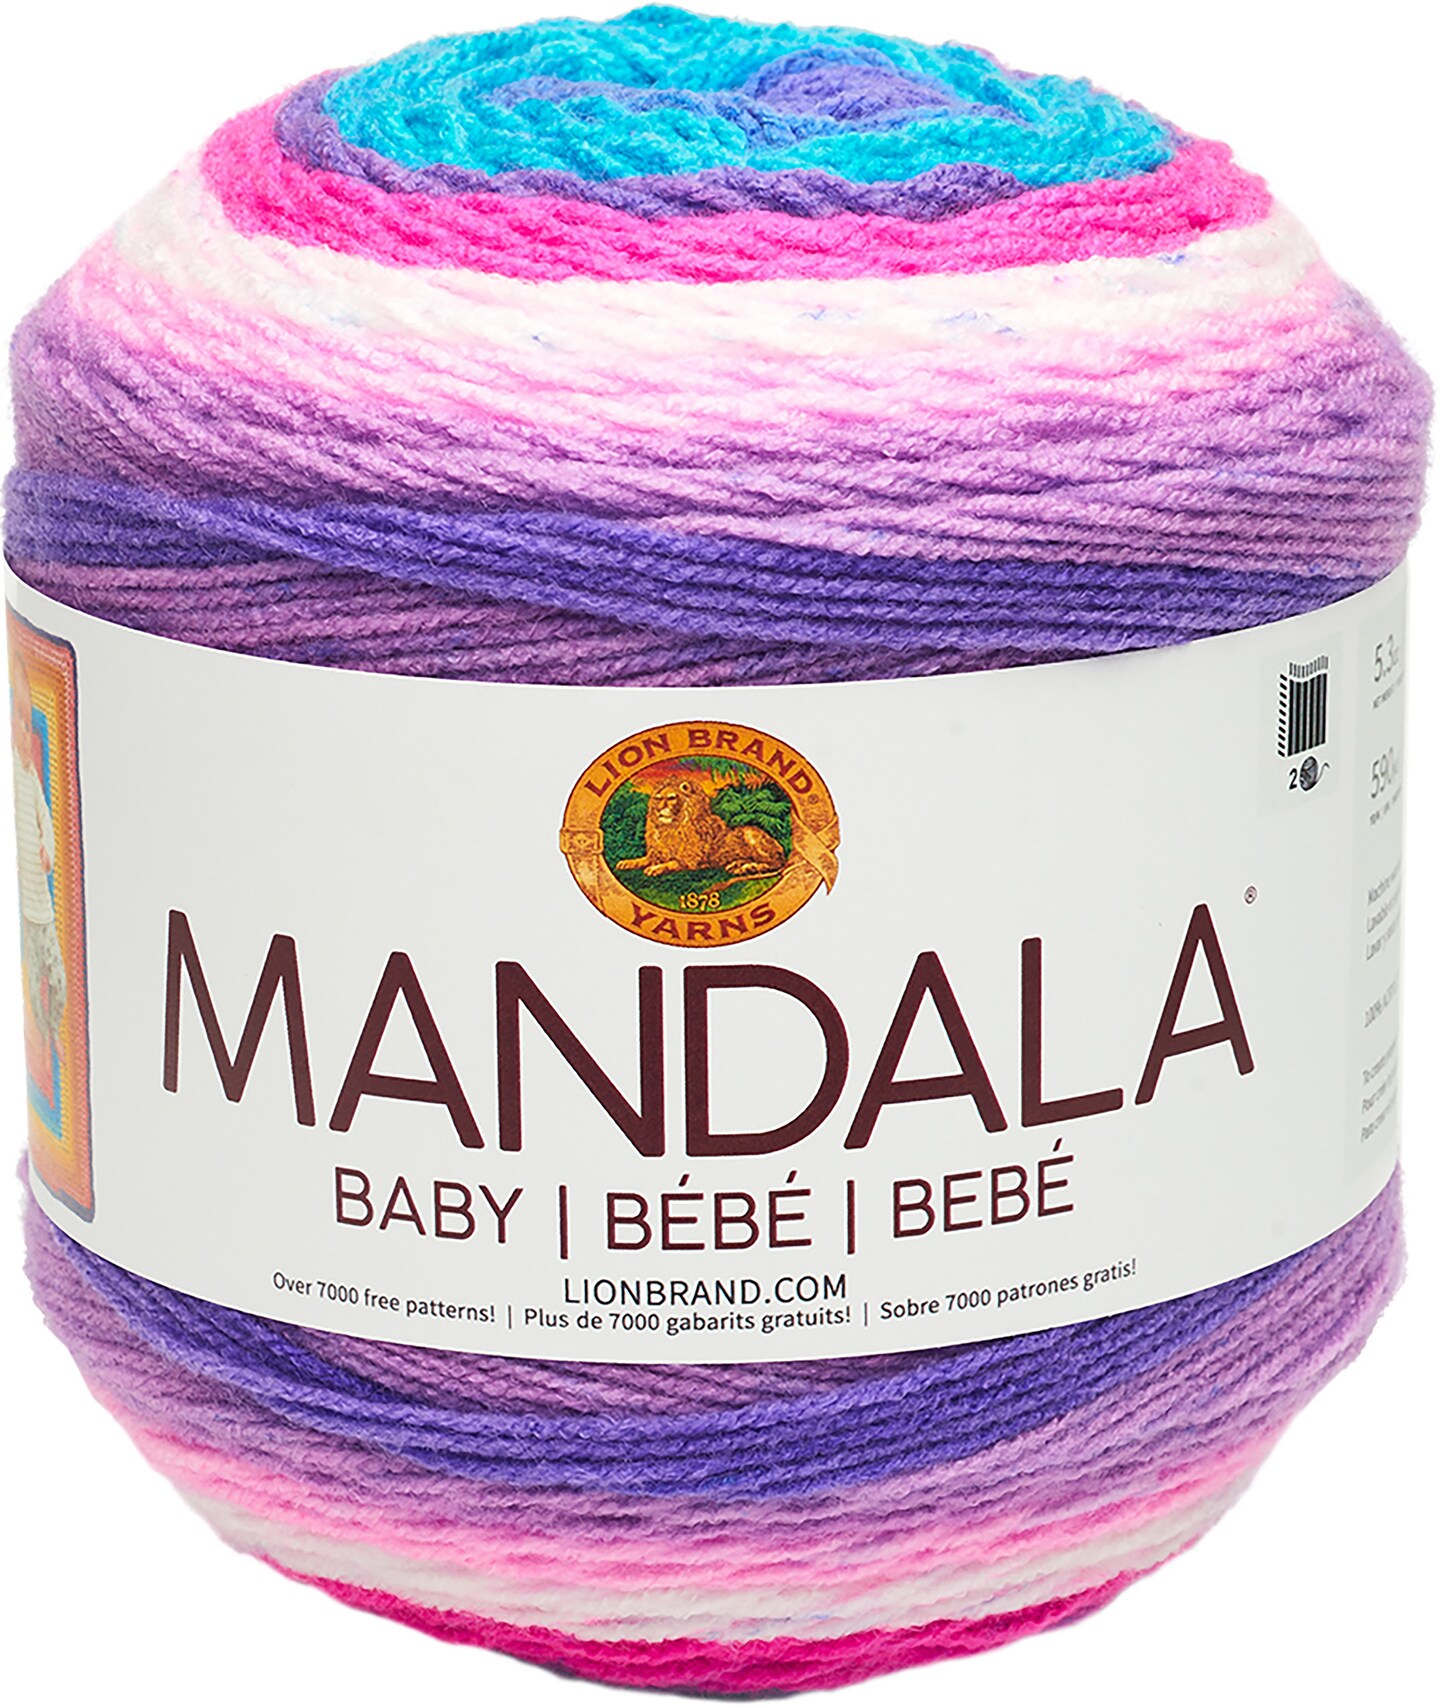 3 Pack Lion Brand® Oh Baby® Yarn